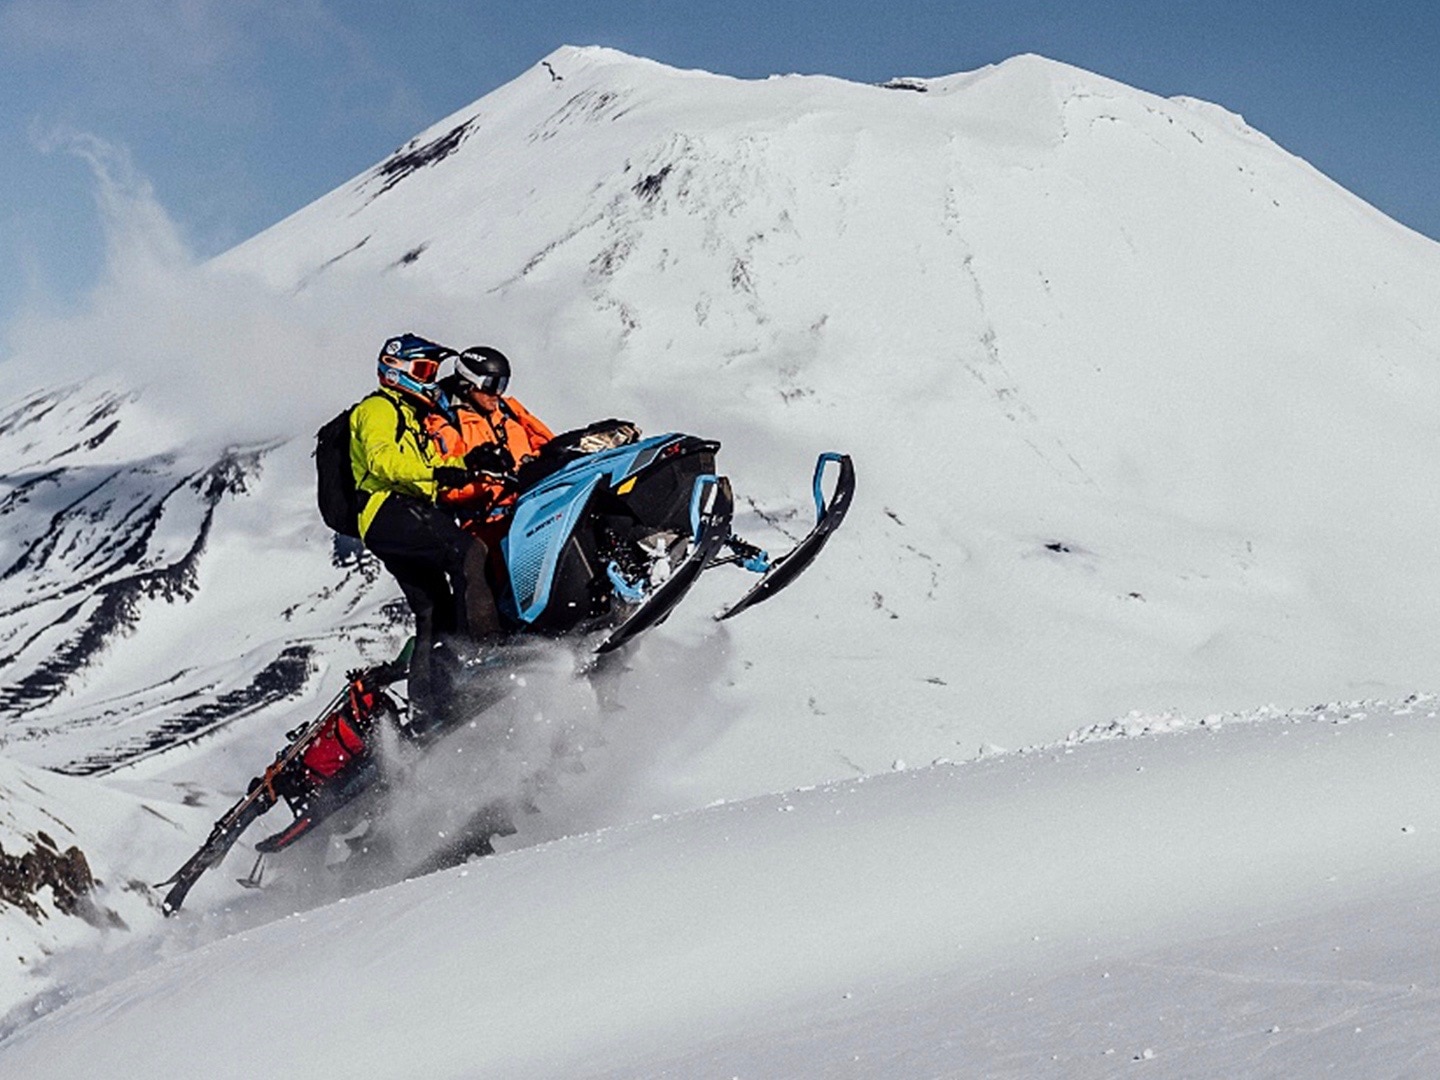 Power sled-skiing in the Andes, Chile